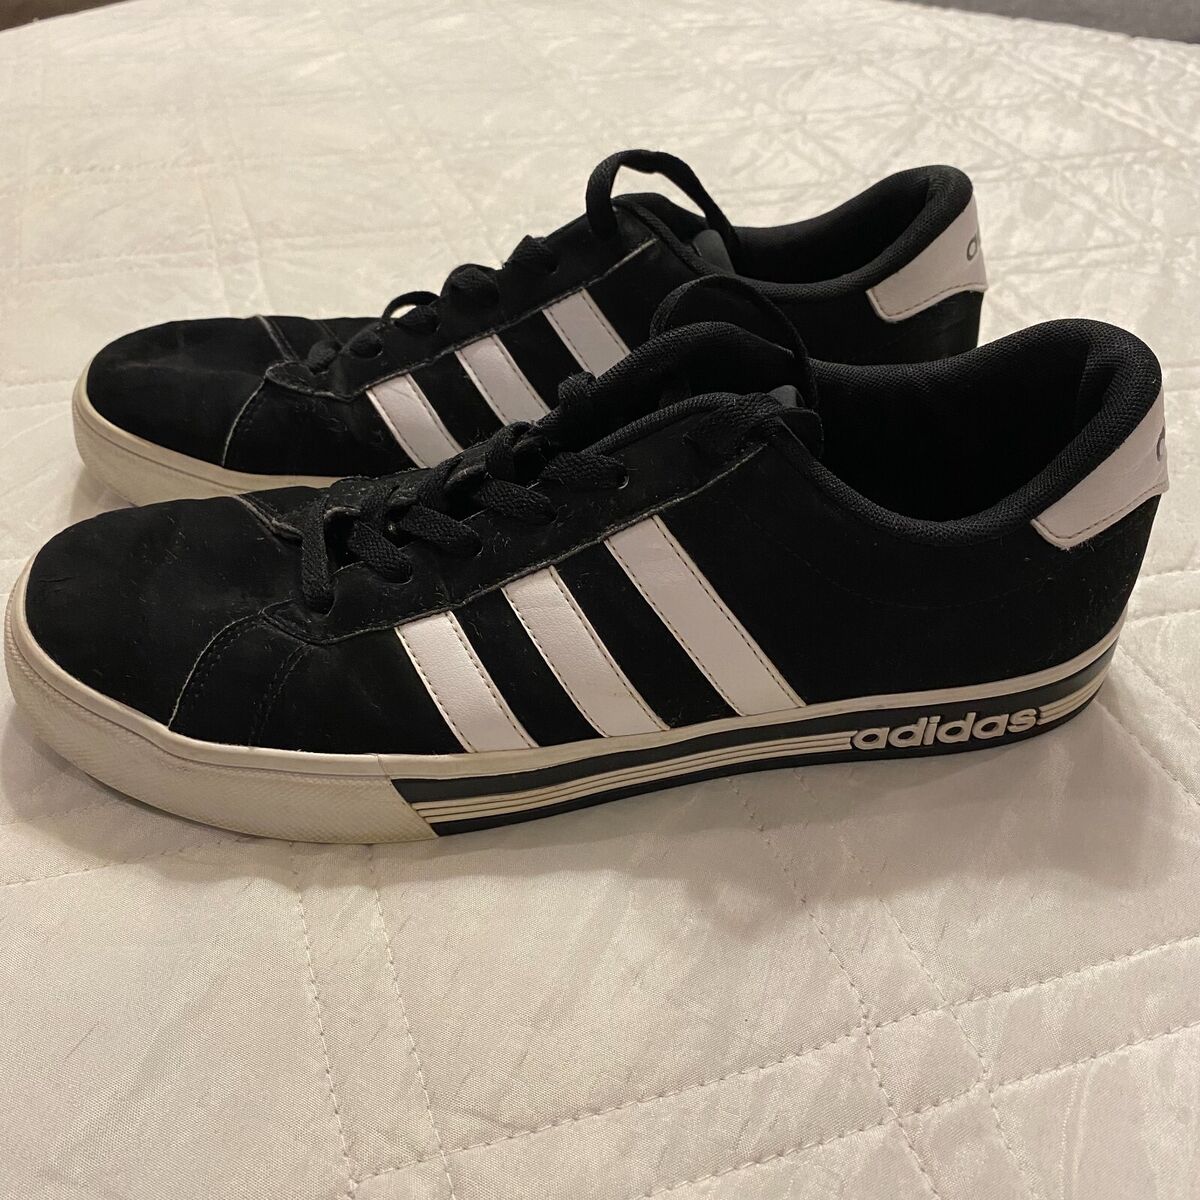 Adidas Mens Neo Daily Team AW4575 Casual Shoes Sneakers | eBay